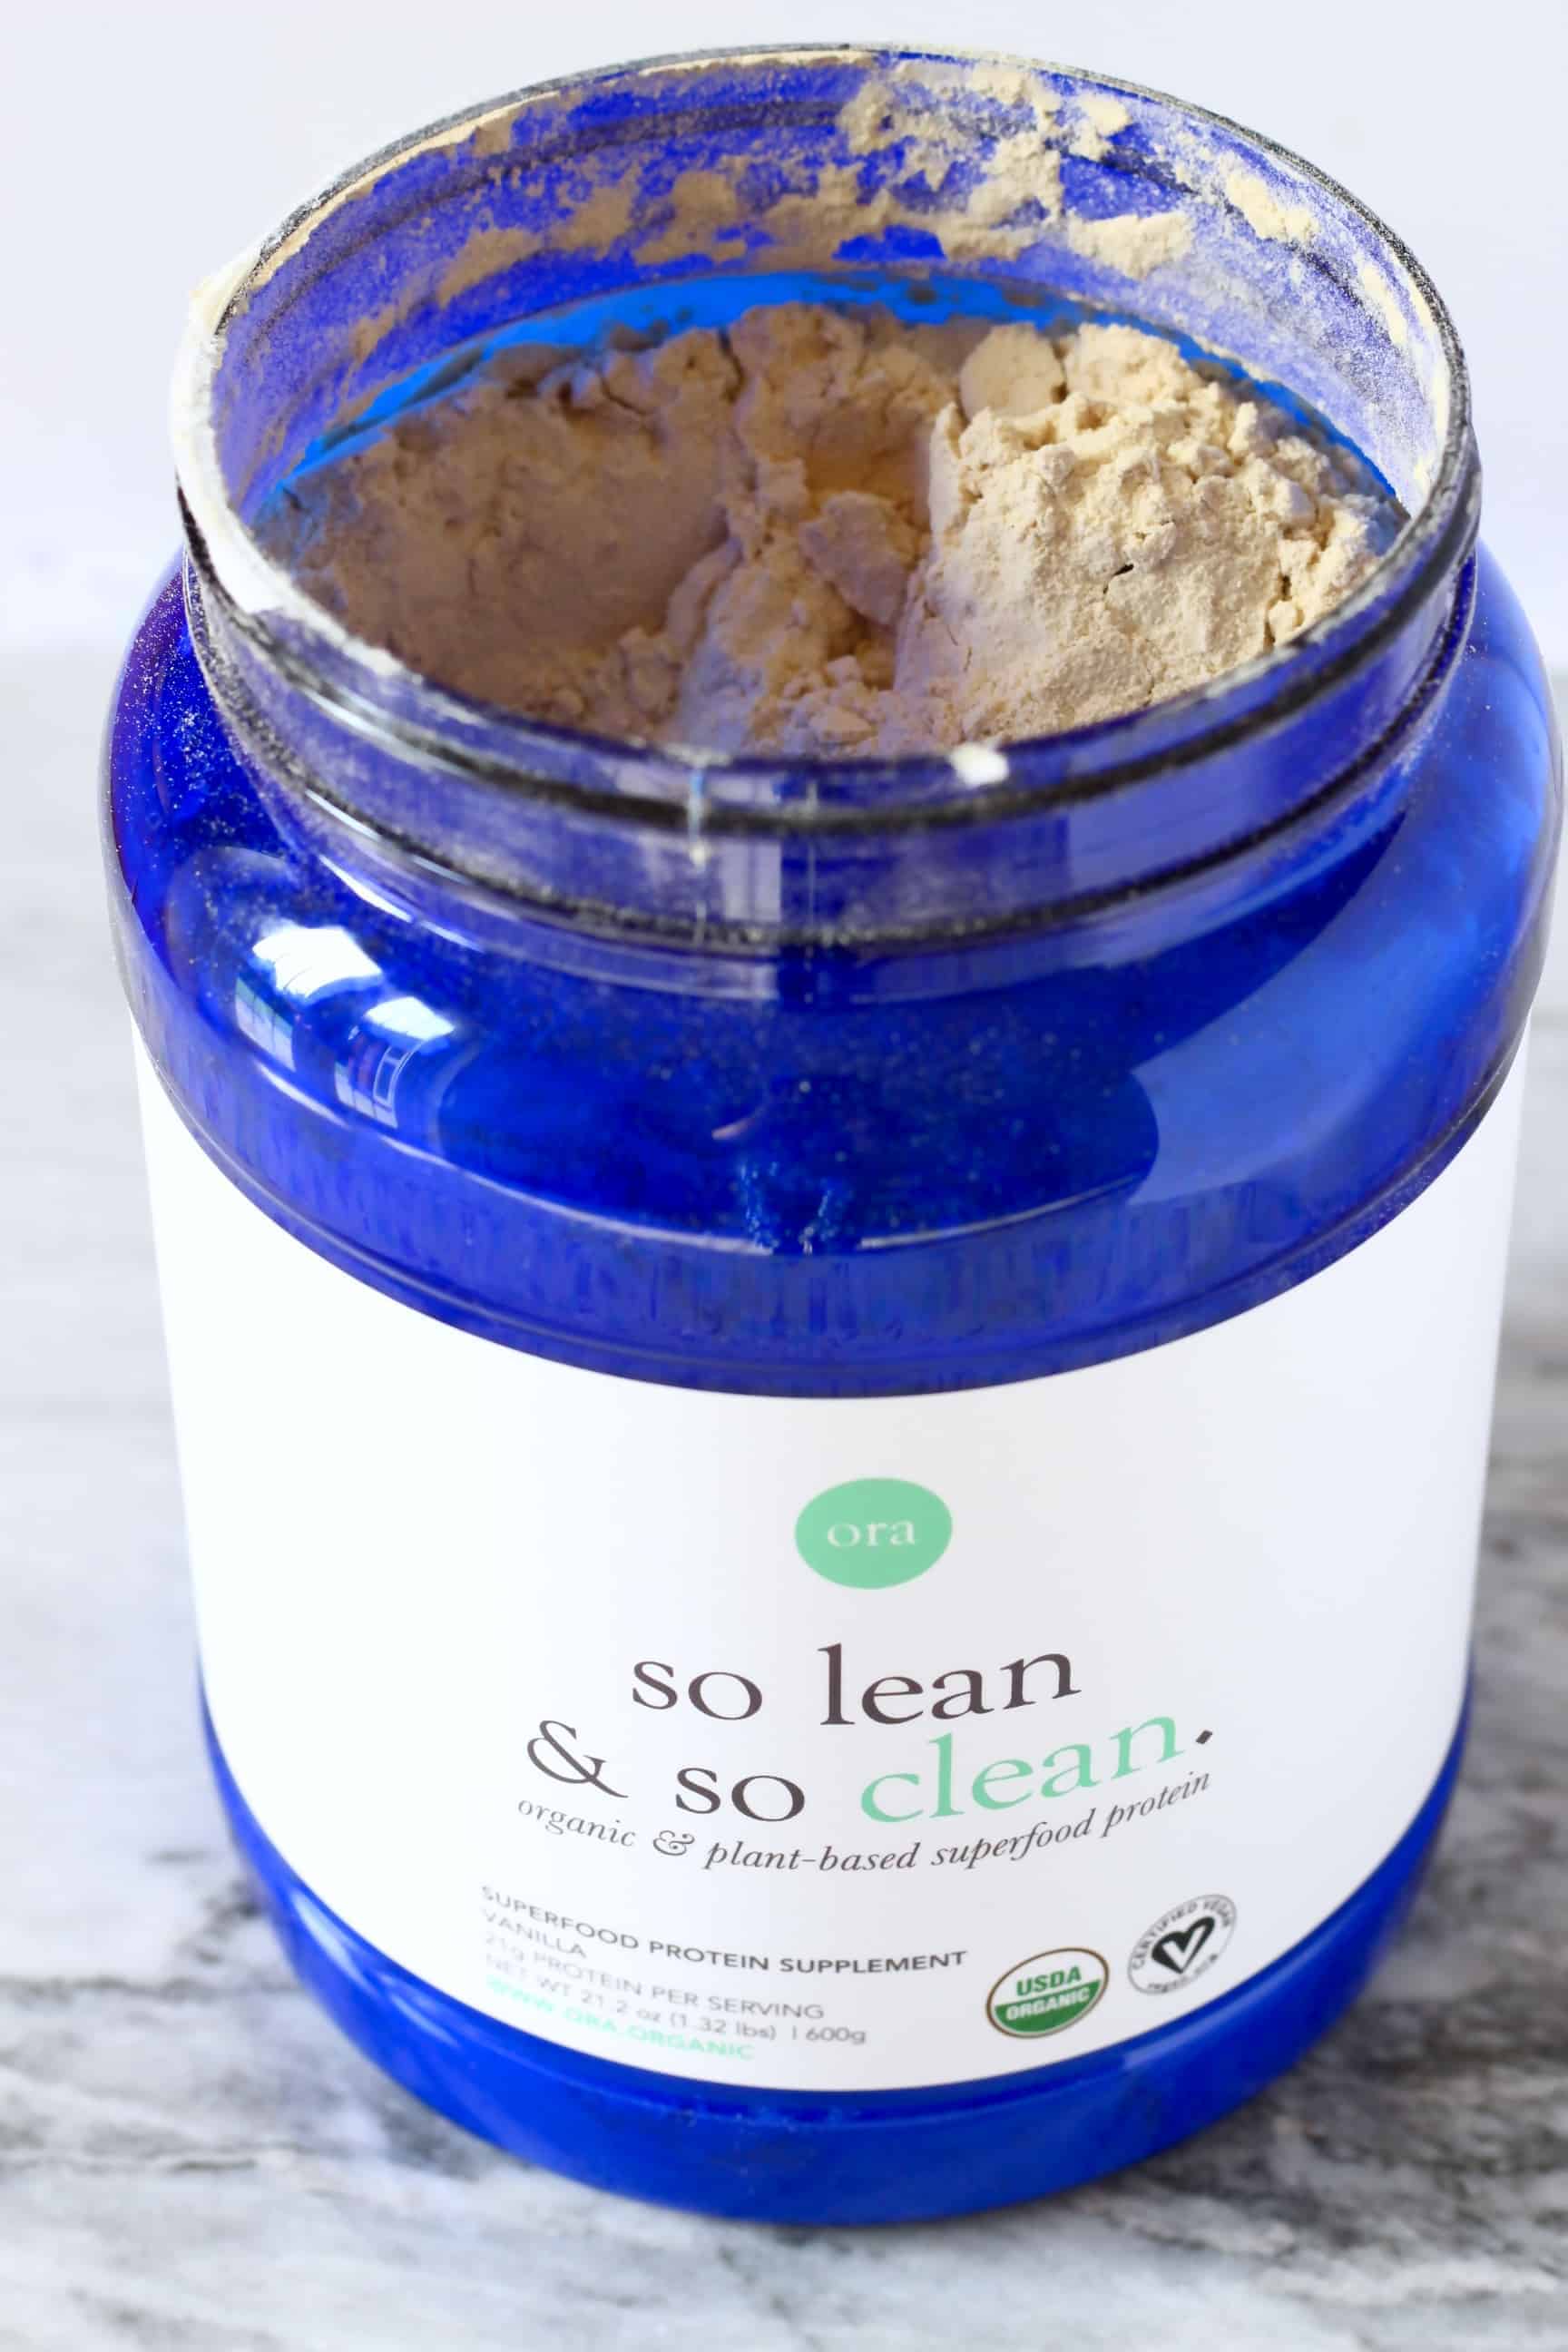 A blue pot of Ora Organic protein powder with the top taken off and brown powder visible inside